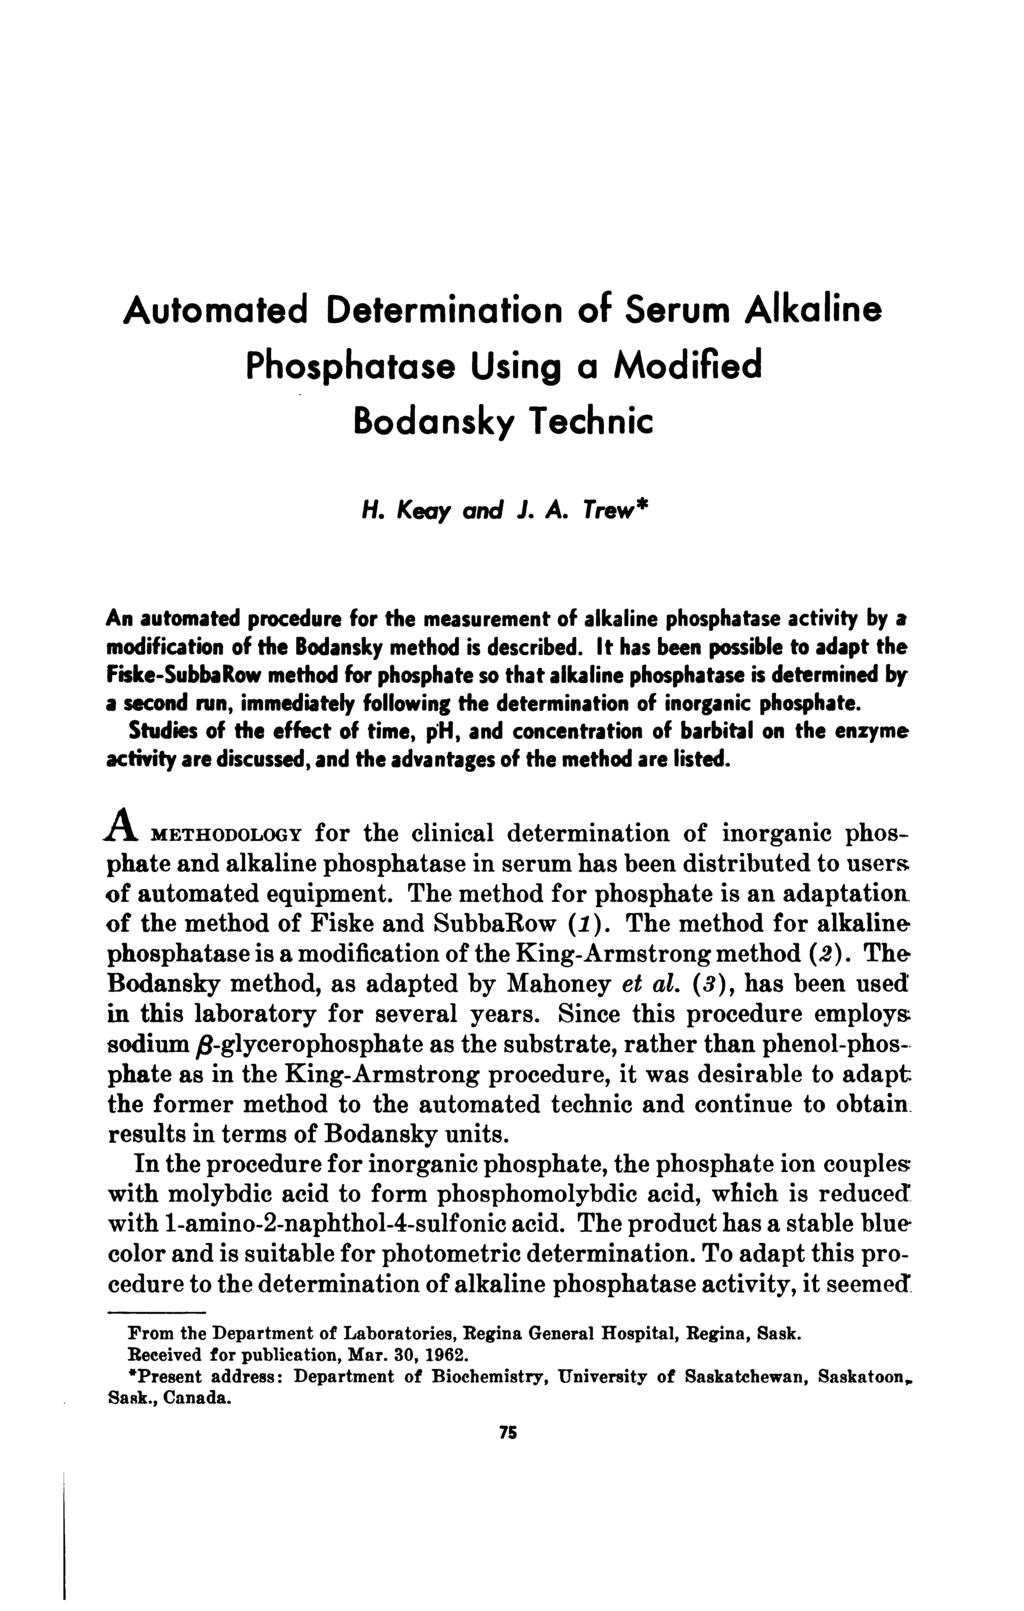 Automated Determination of Serum Alkaline Phosphatase Using a Modified Bodansky Technic H. Keay and J. A. Trew* An automated procedure for the measurement of alkaline phosphatase activity by a modification of the Bodansky method is described.